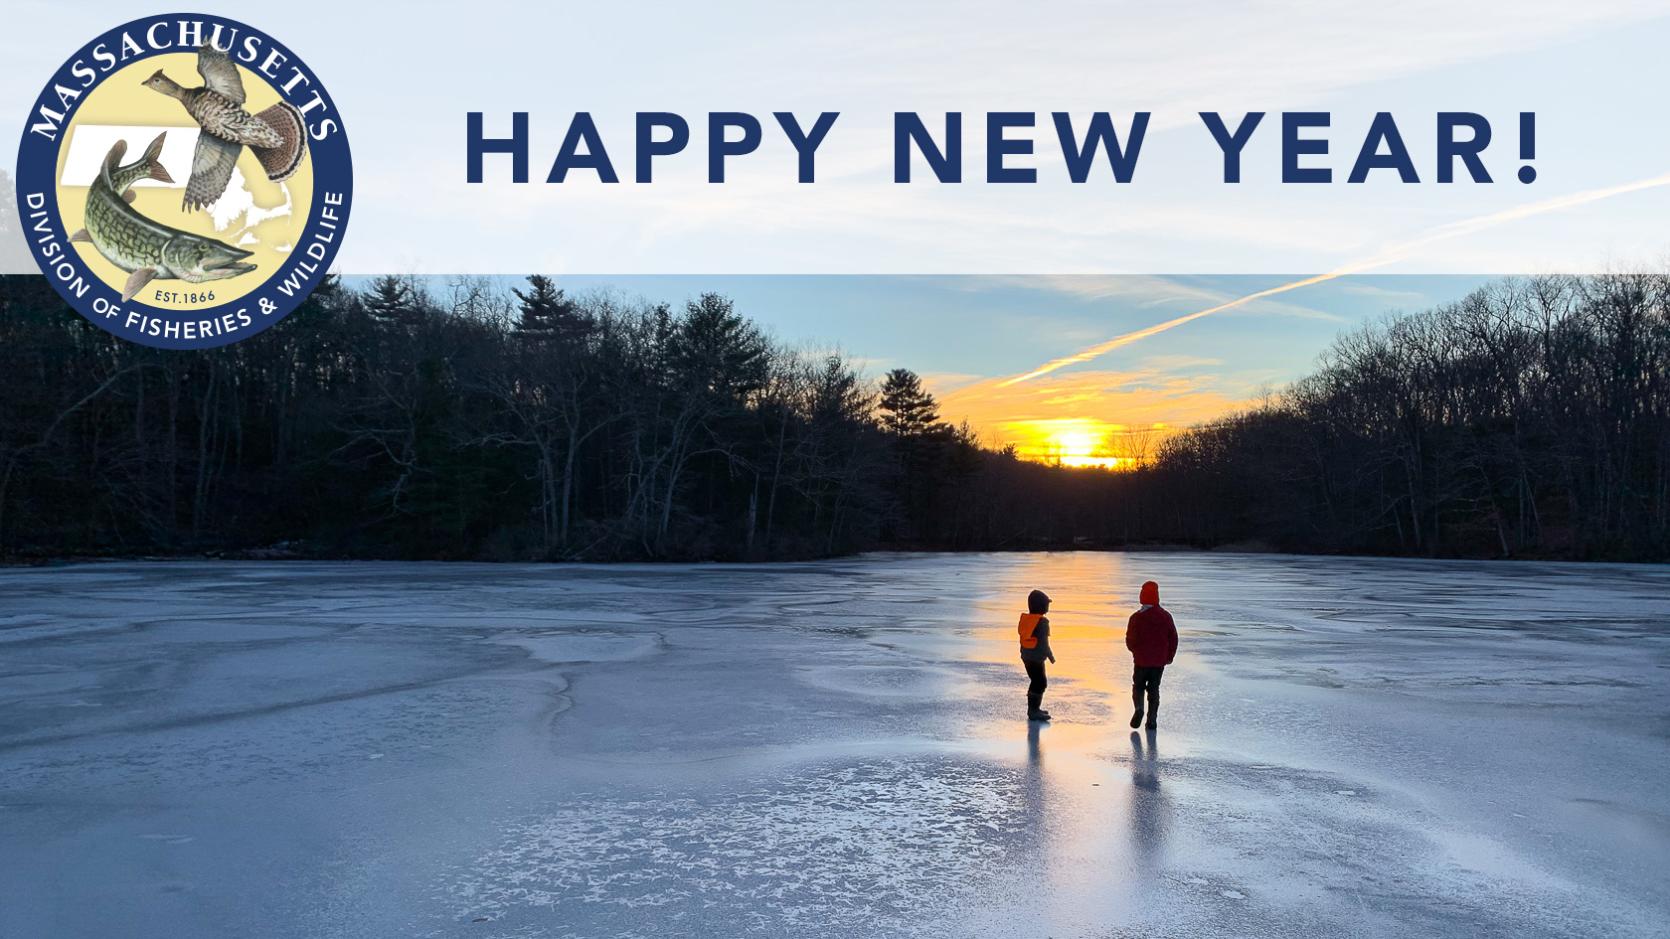 Happy New Year graphic with sunset over an icy pond